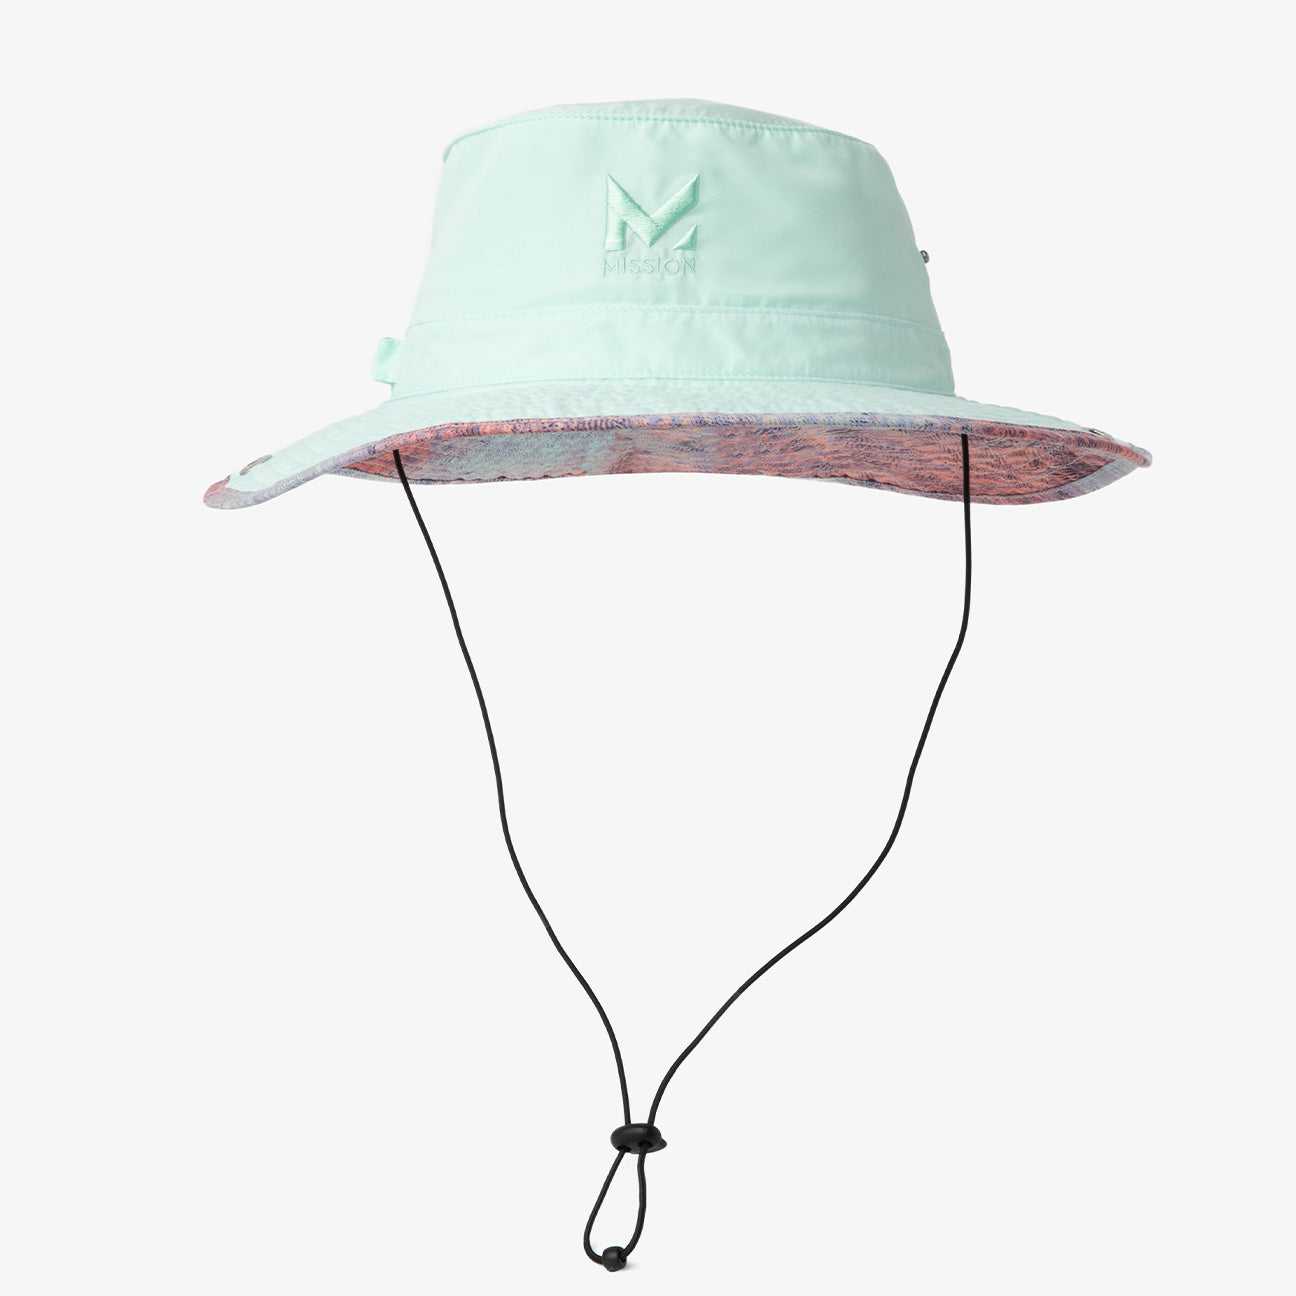 Mission Unisex 1 Size Fits Most Bronze Green Cooling Bucket Hat 5445 - The  Home Depot